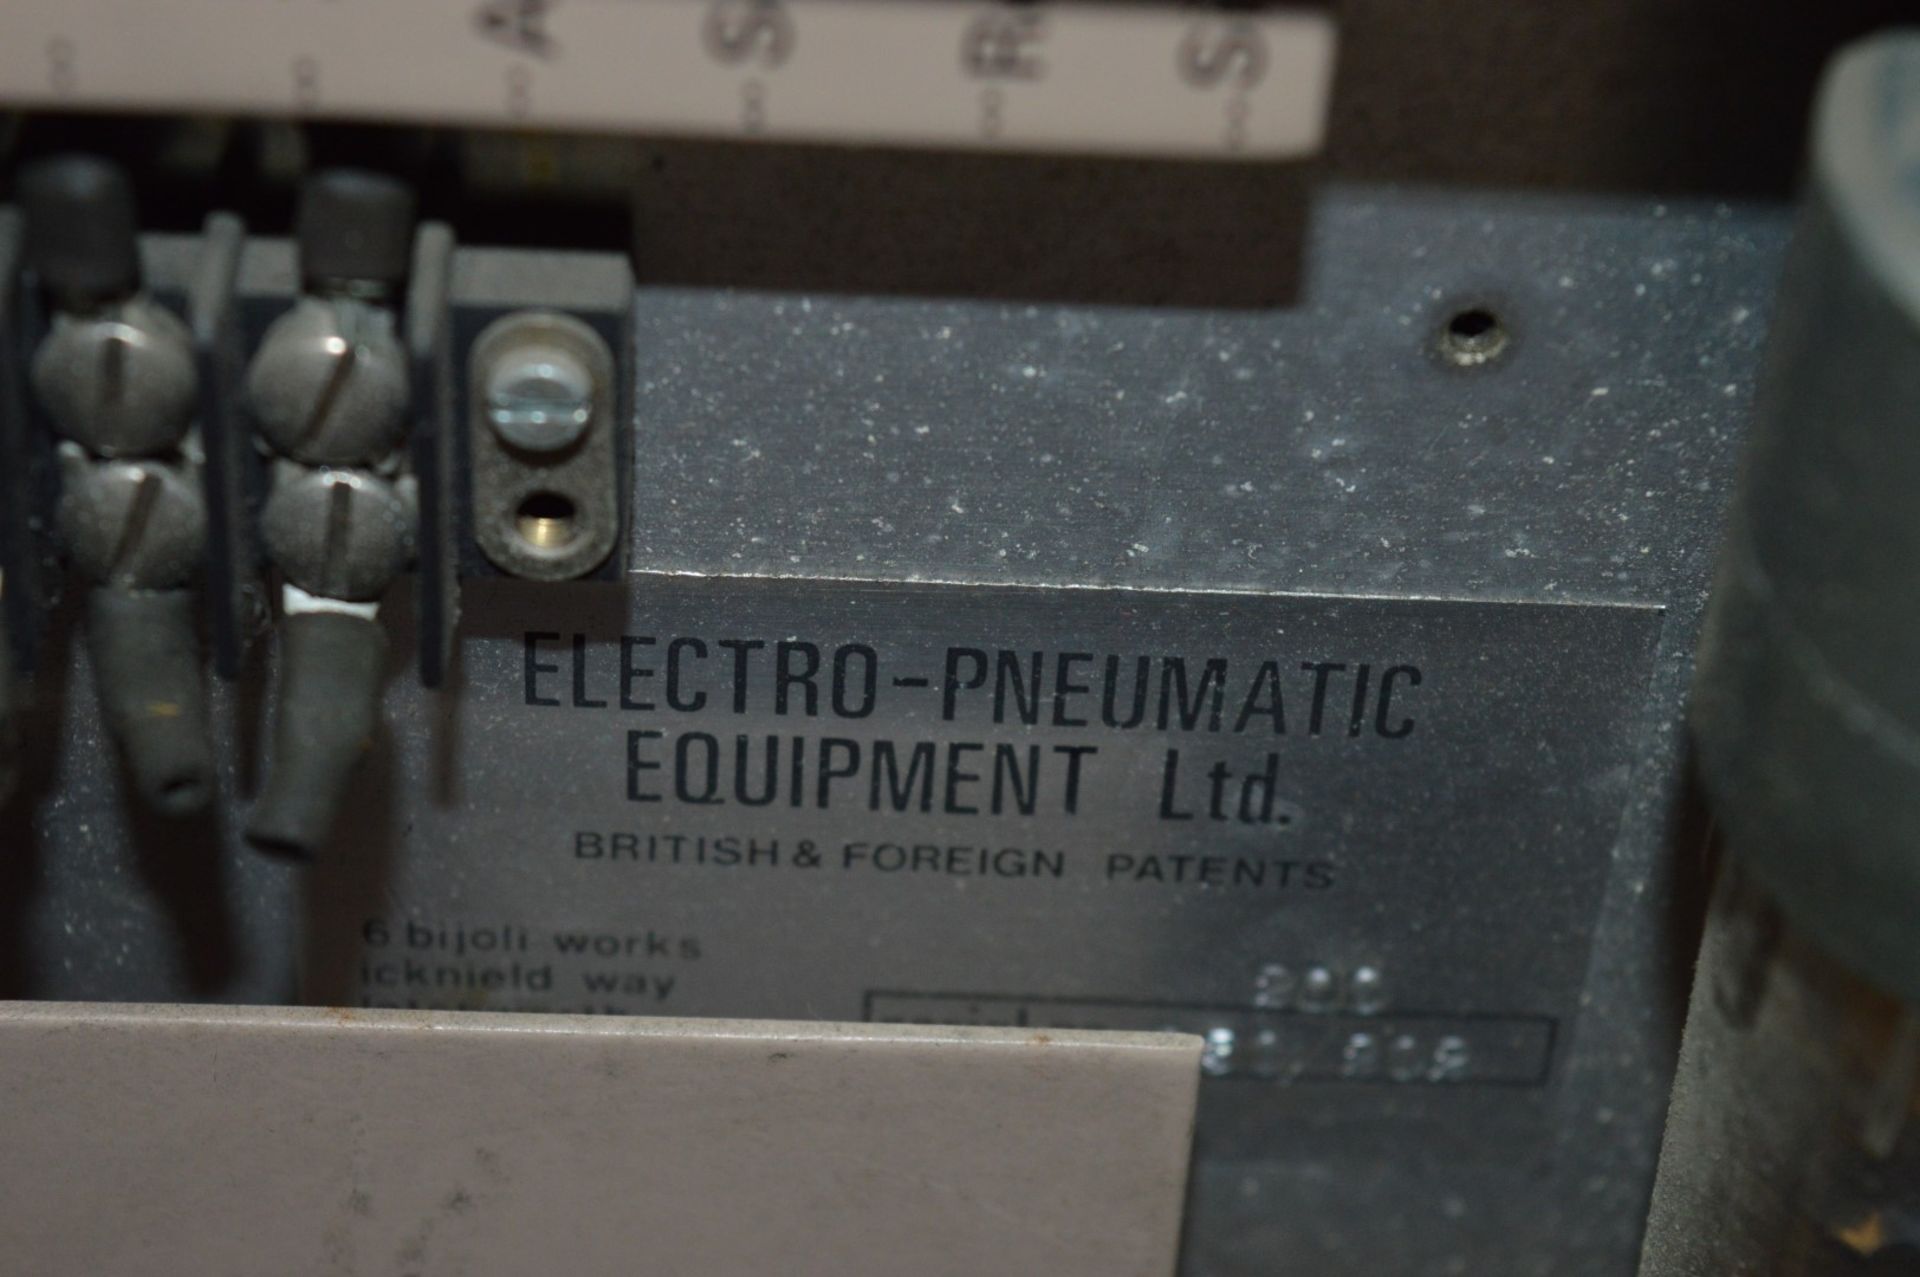 1 x Epetron 200 Mk2 Electro Pneumatic Tester - Vintage Test Equipment - CL011 - Ref J611 - Location: - Image 5 of 8